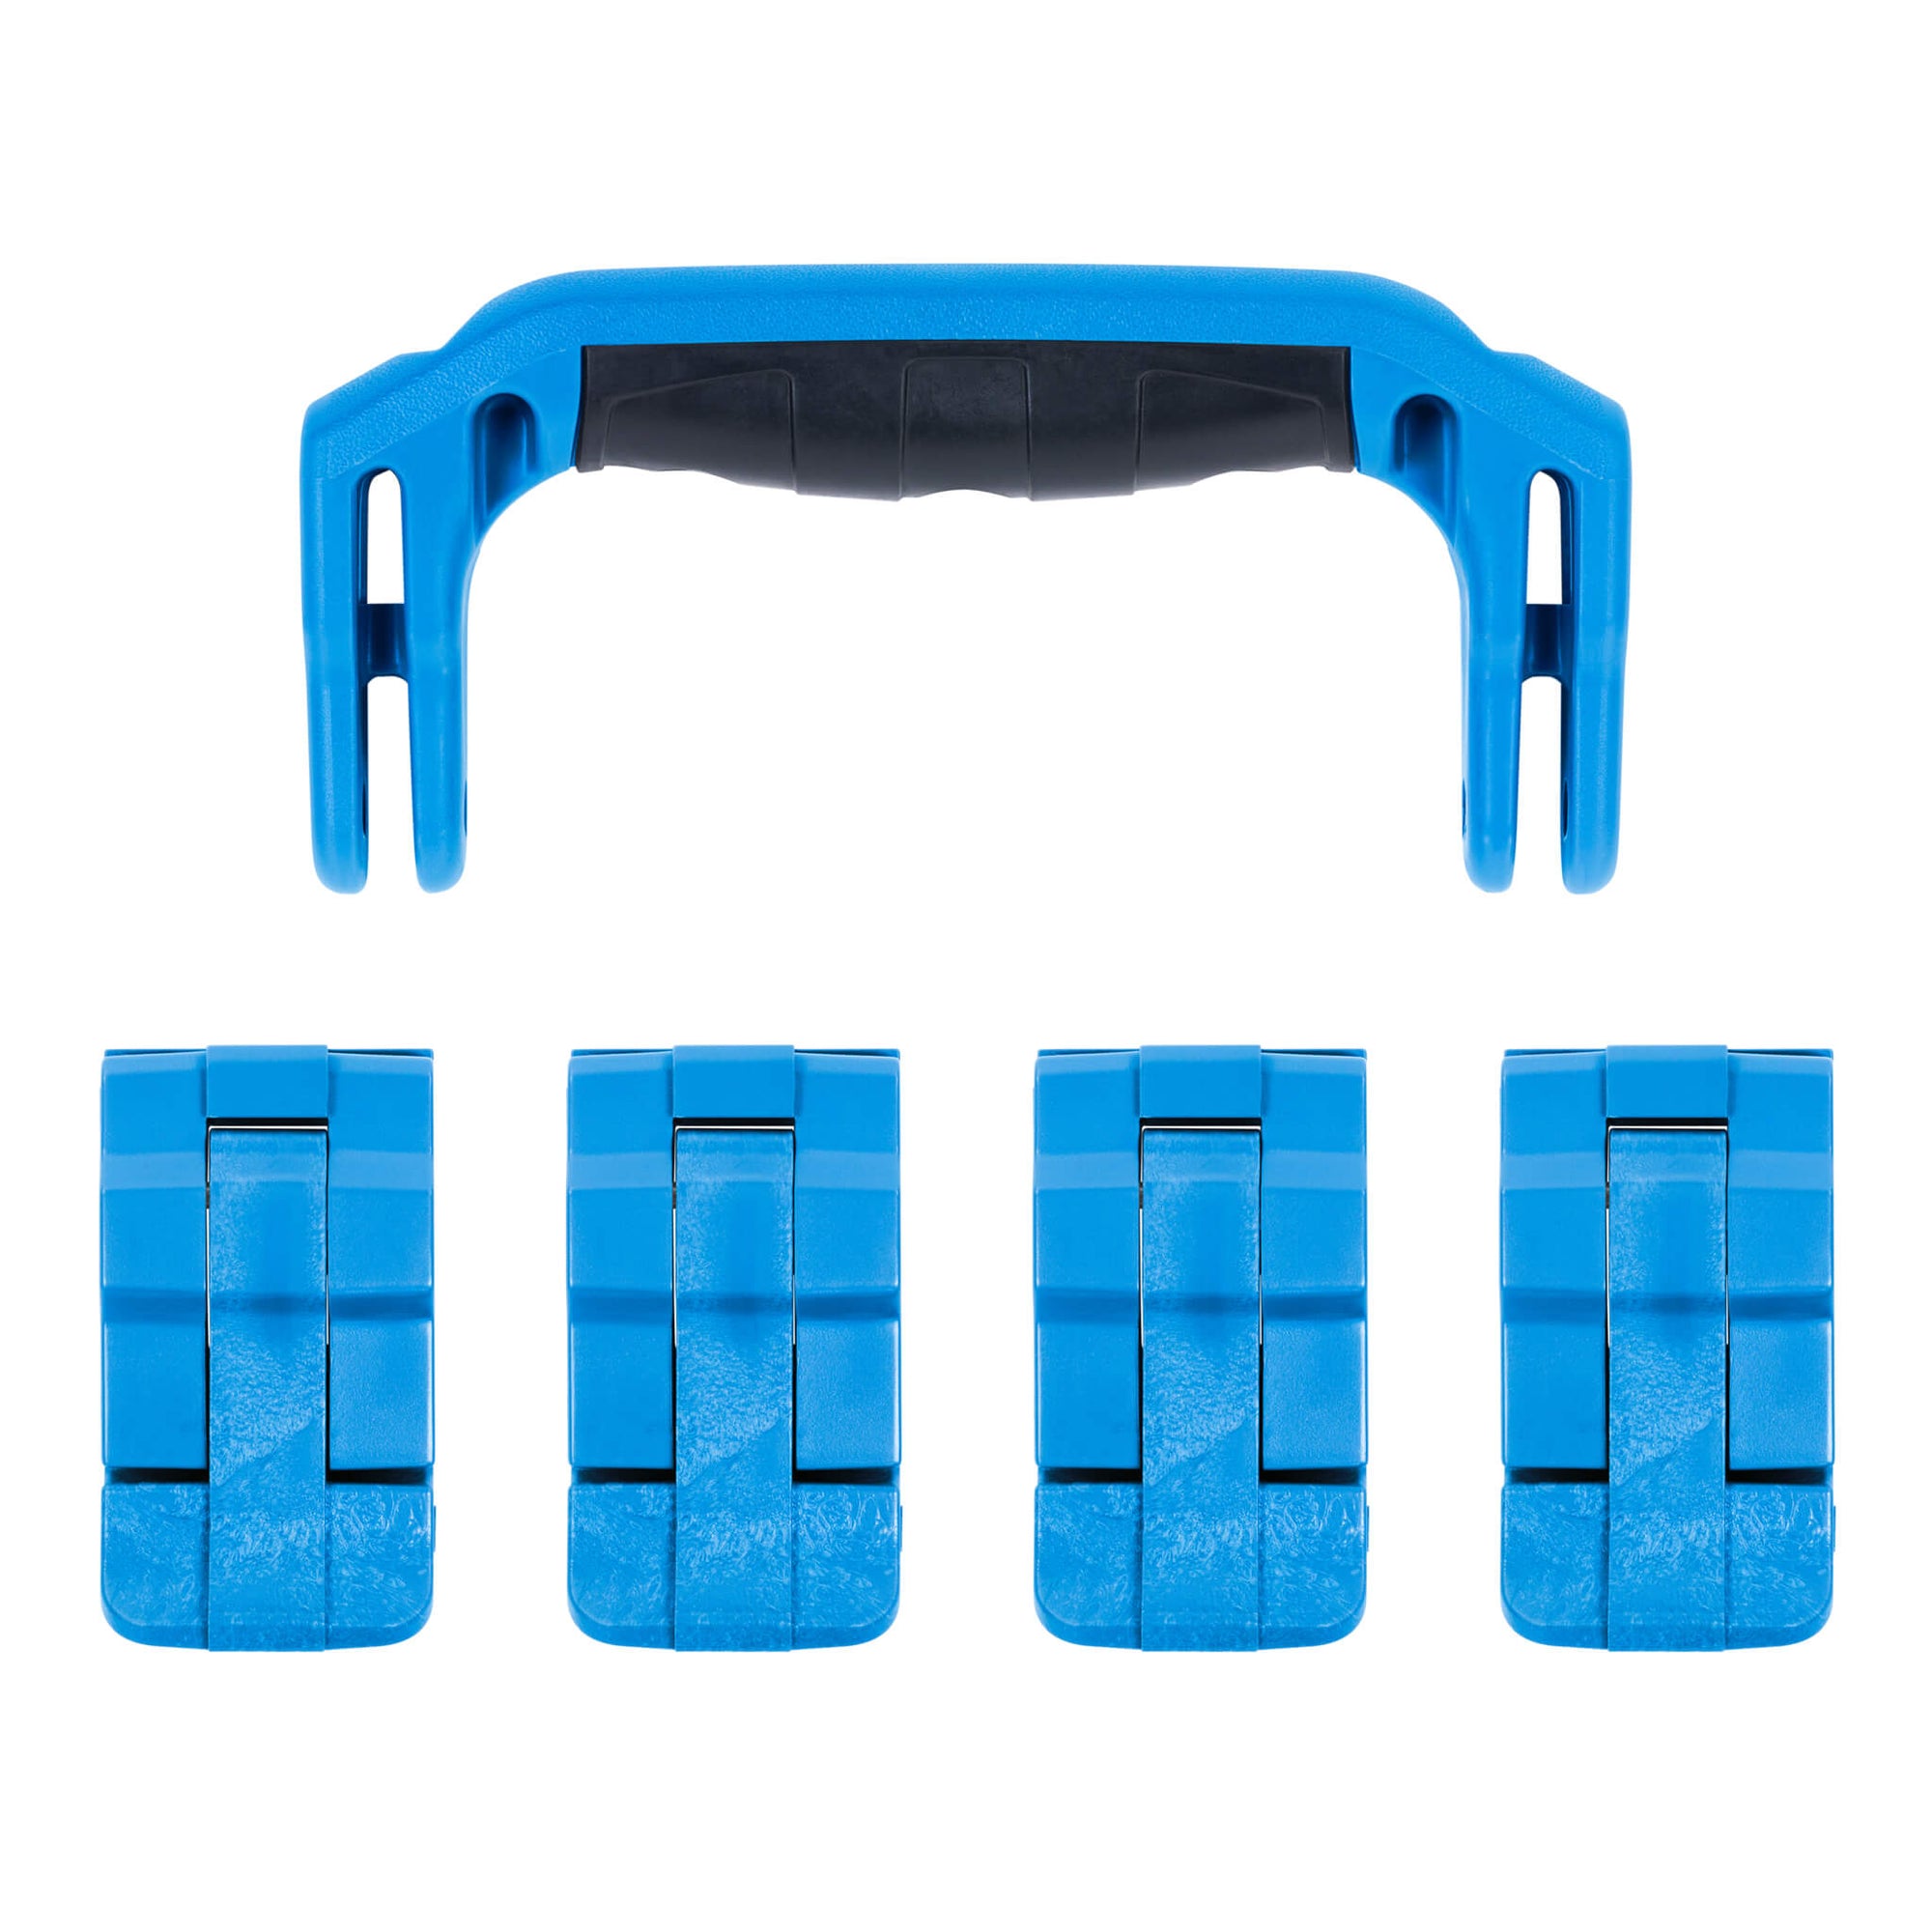 Pelican 1495 Replacement Handle & Latches, Blue (Set of 1 Handle, 4 Latches) ColorCase 